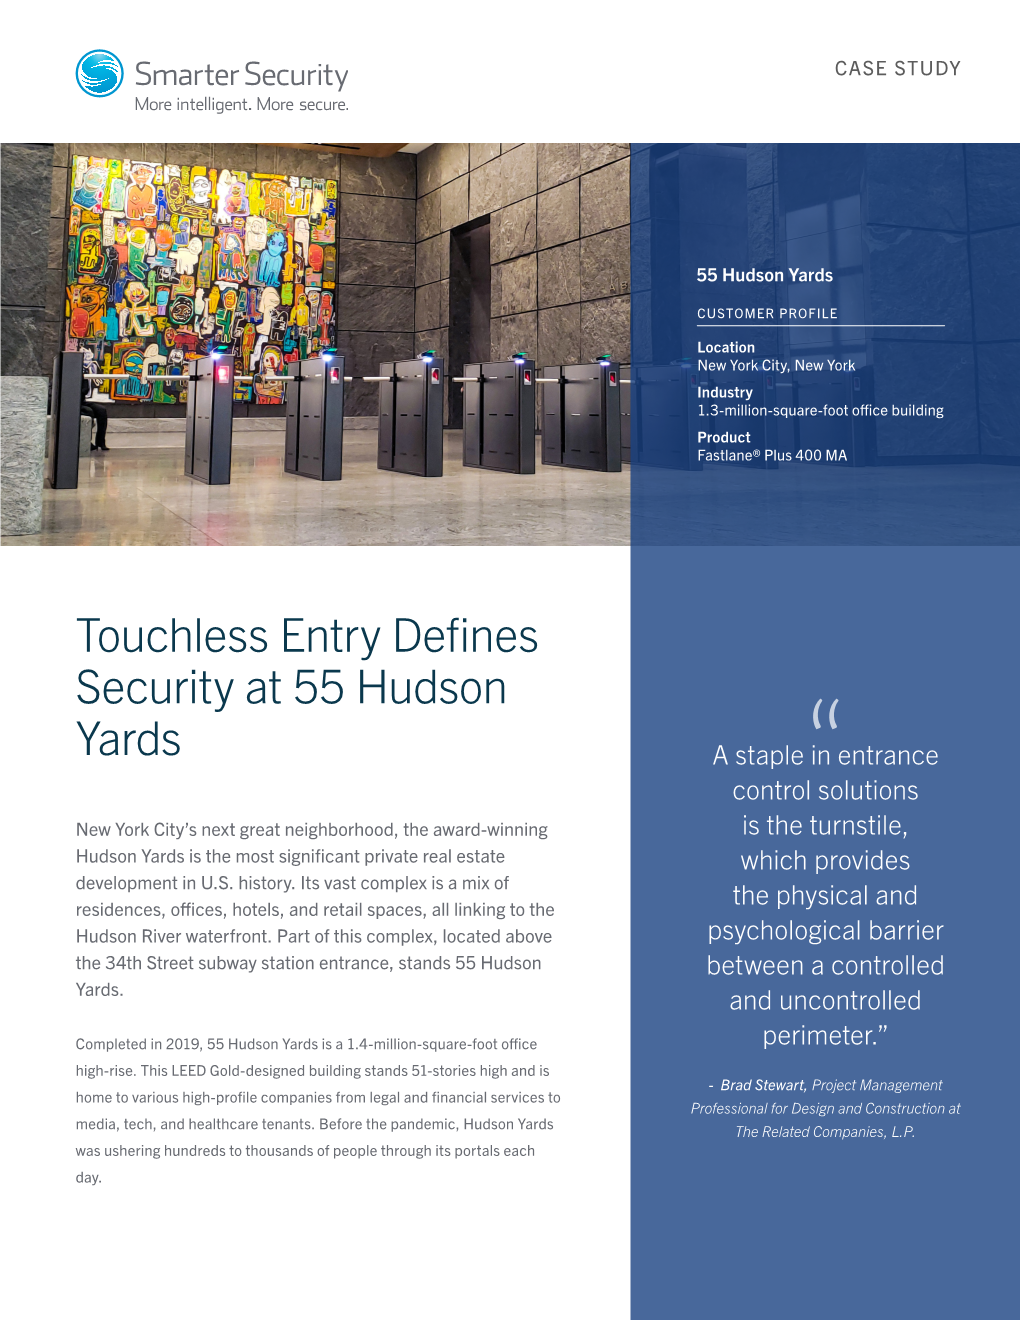 Touchless Entry Defines Security at 55 Hudson Yards